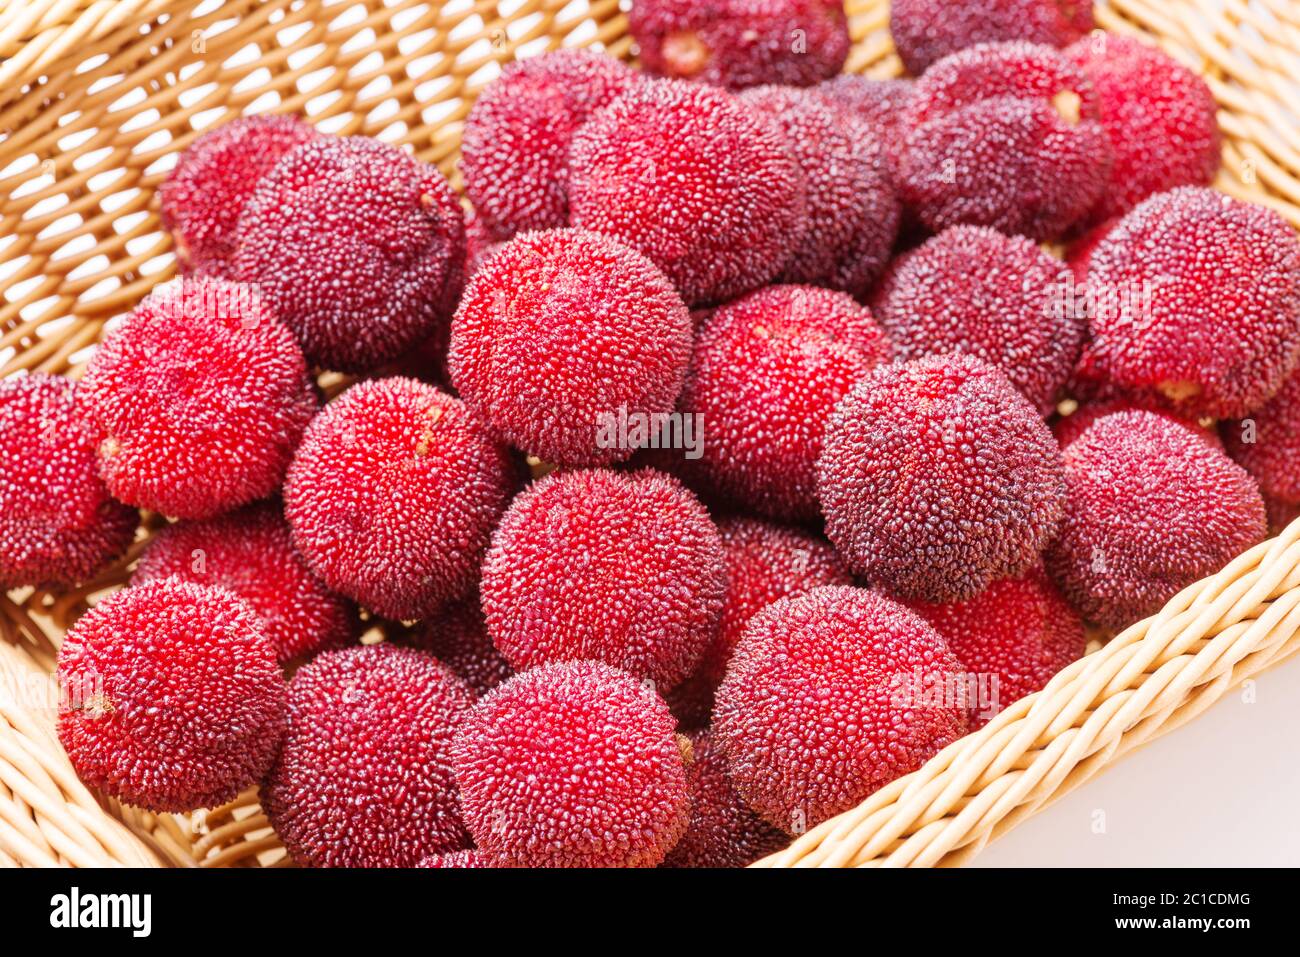 red and ripe waxberry under white background Stock Photo